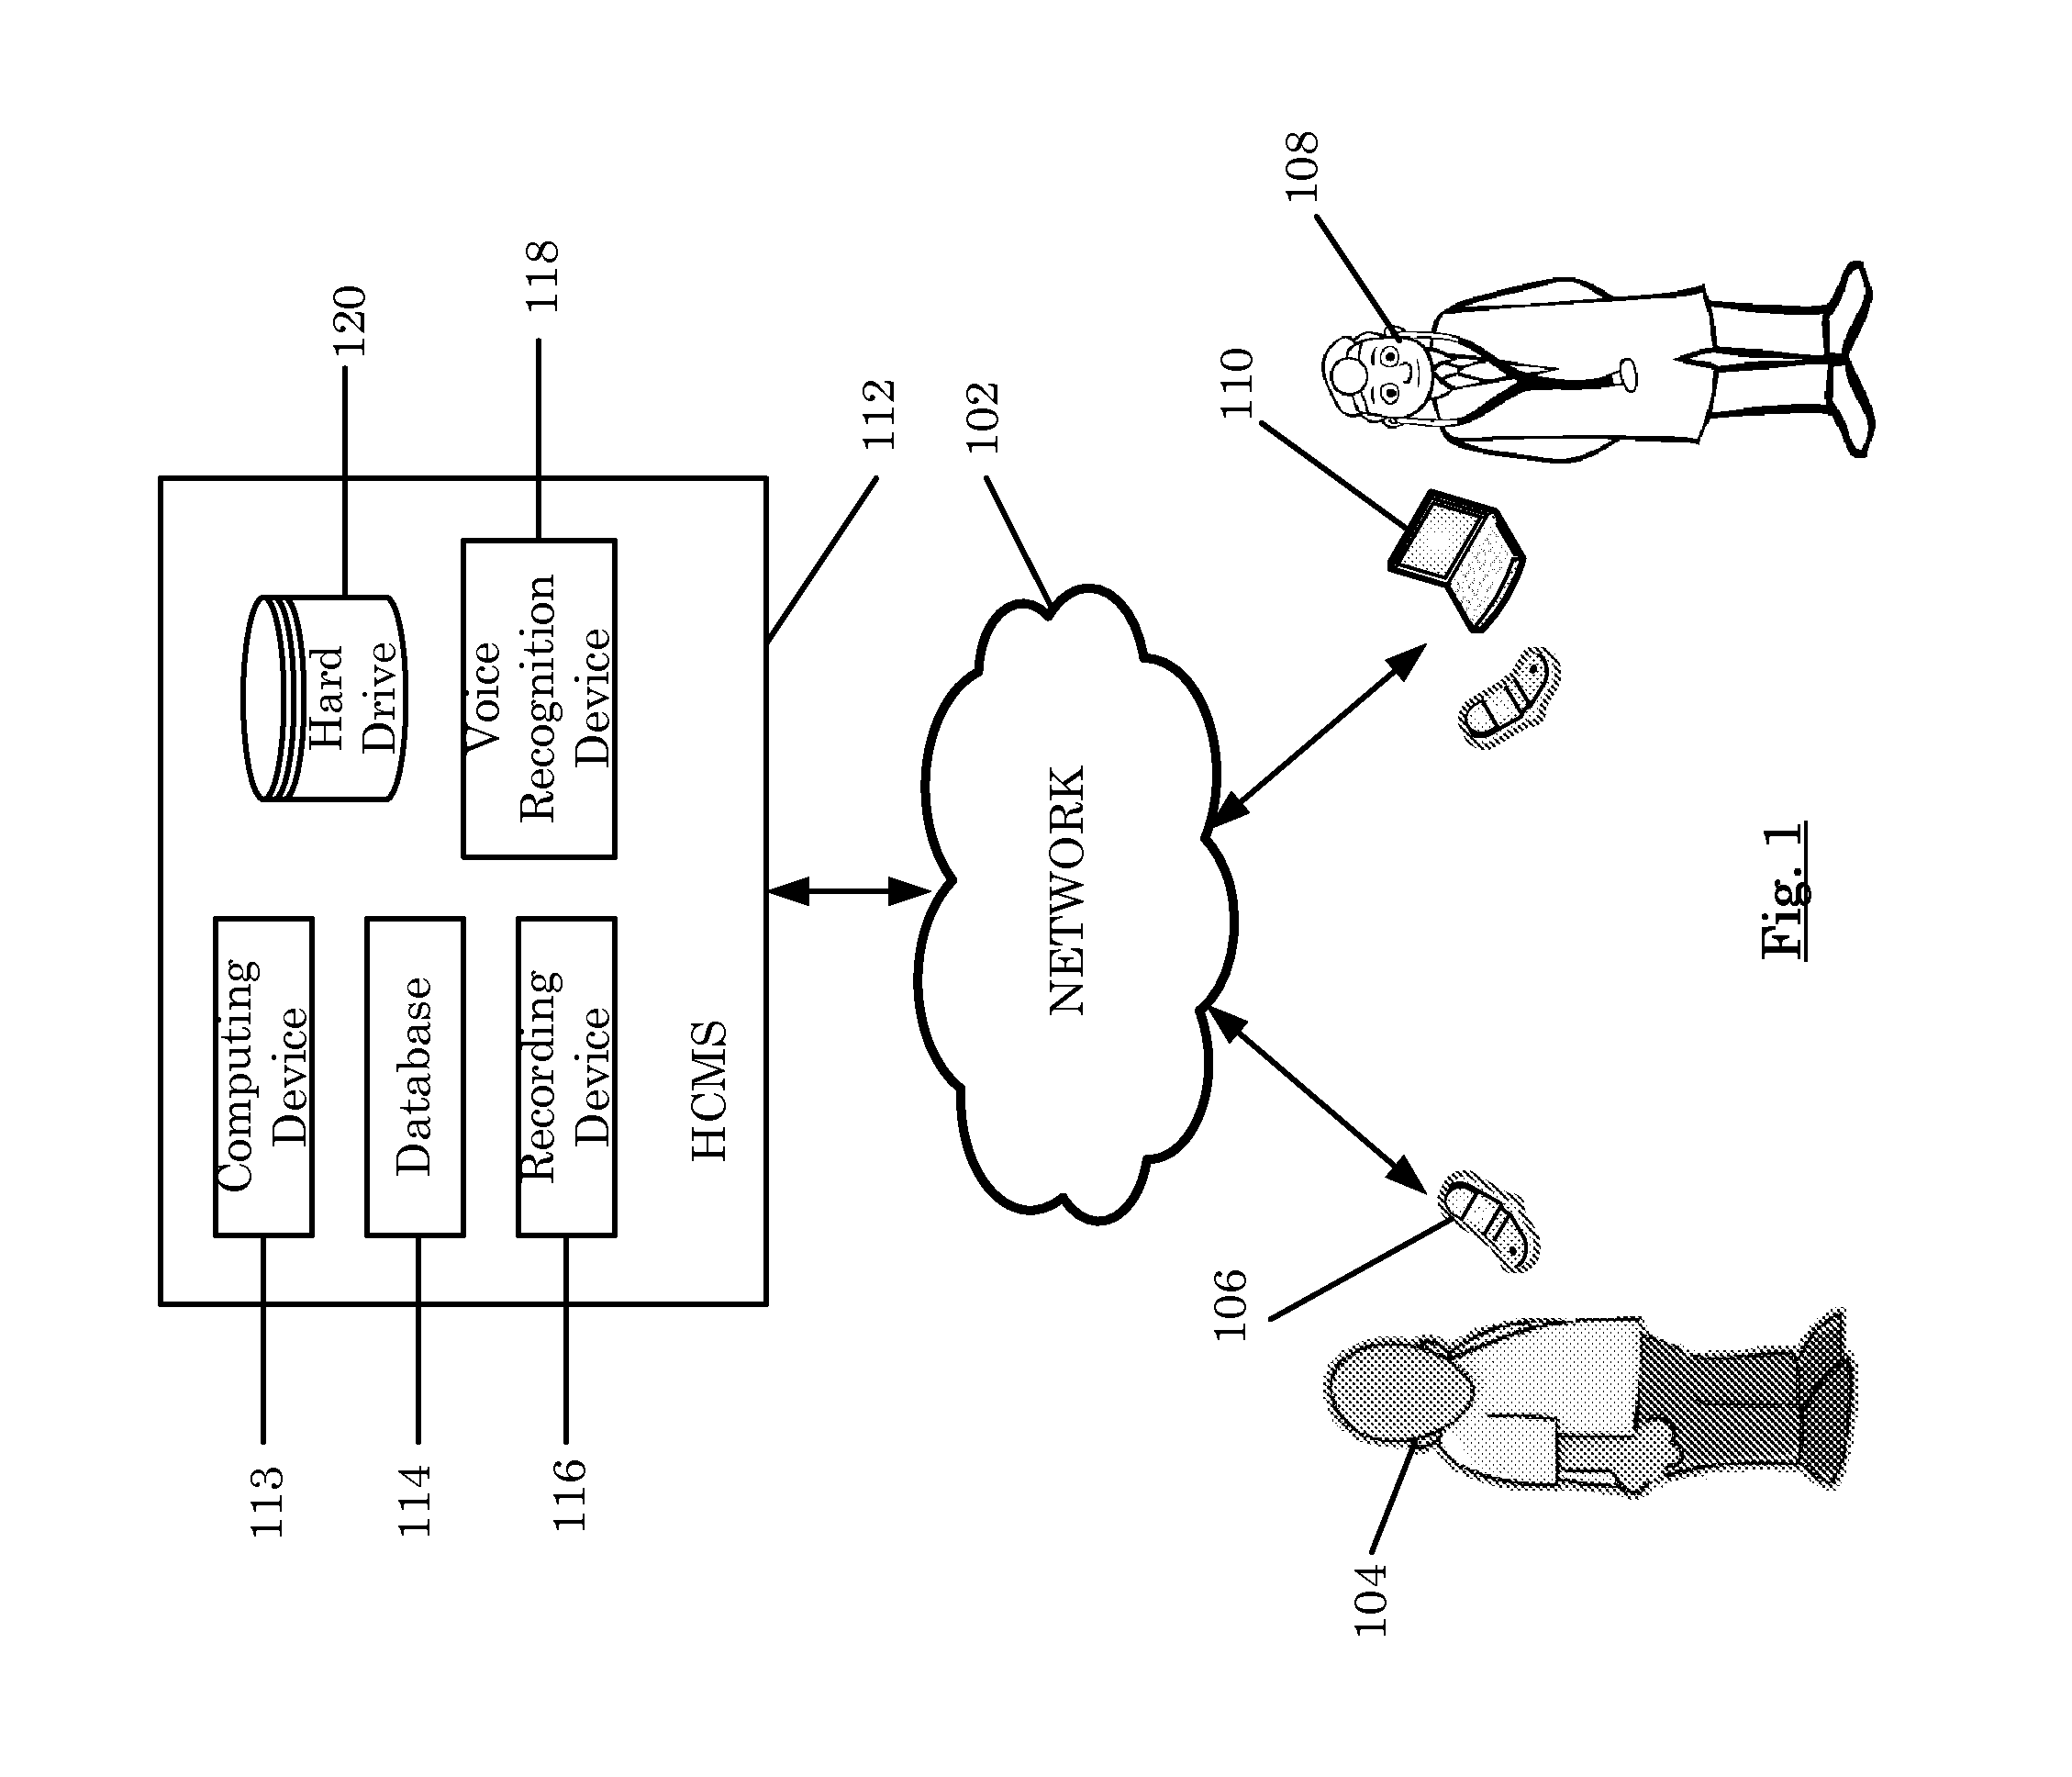 System and Method for Providing Healthcare Related Services